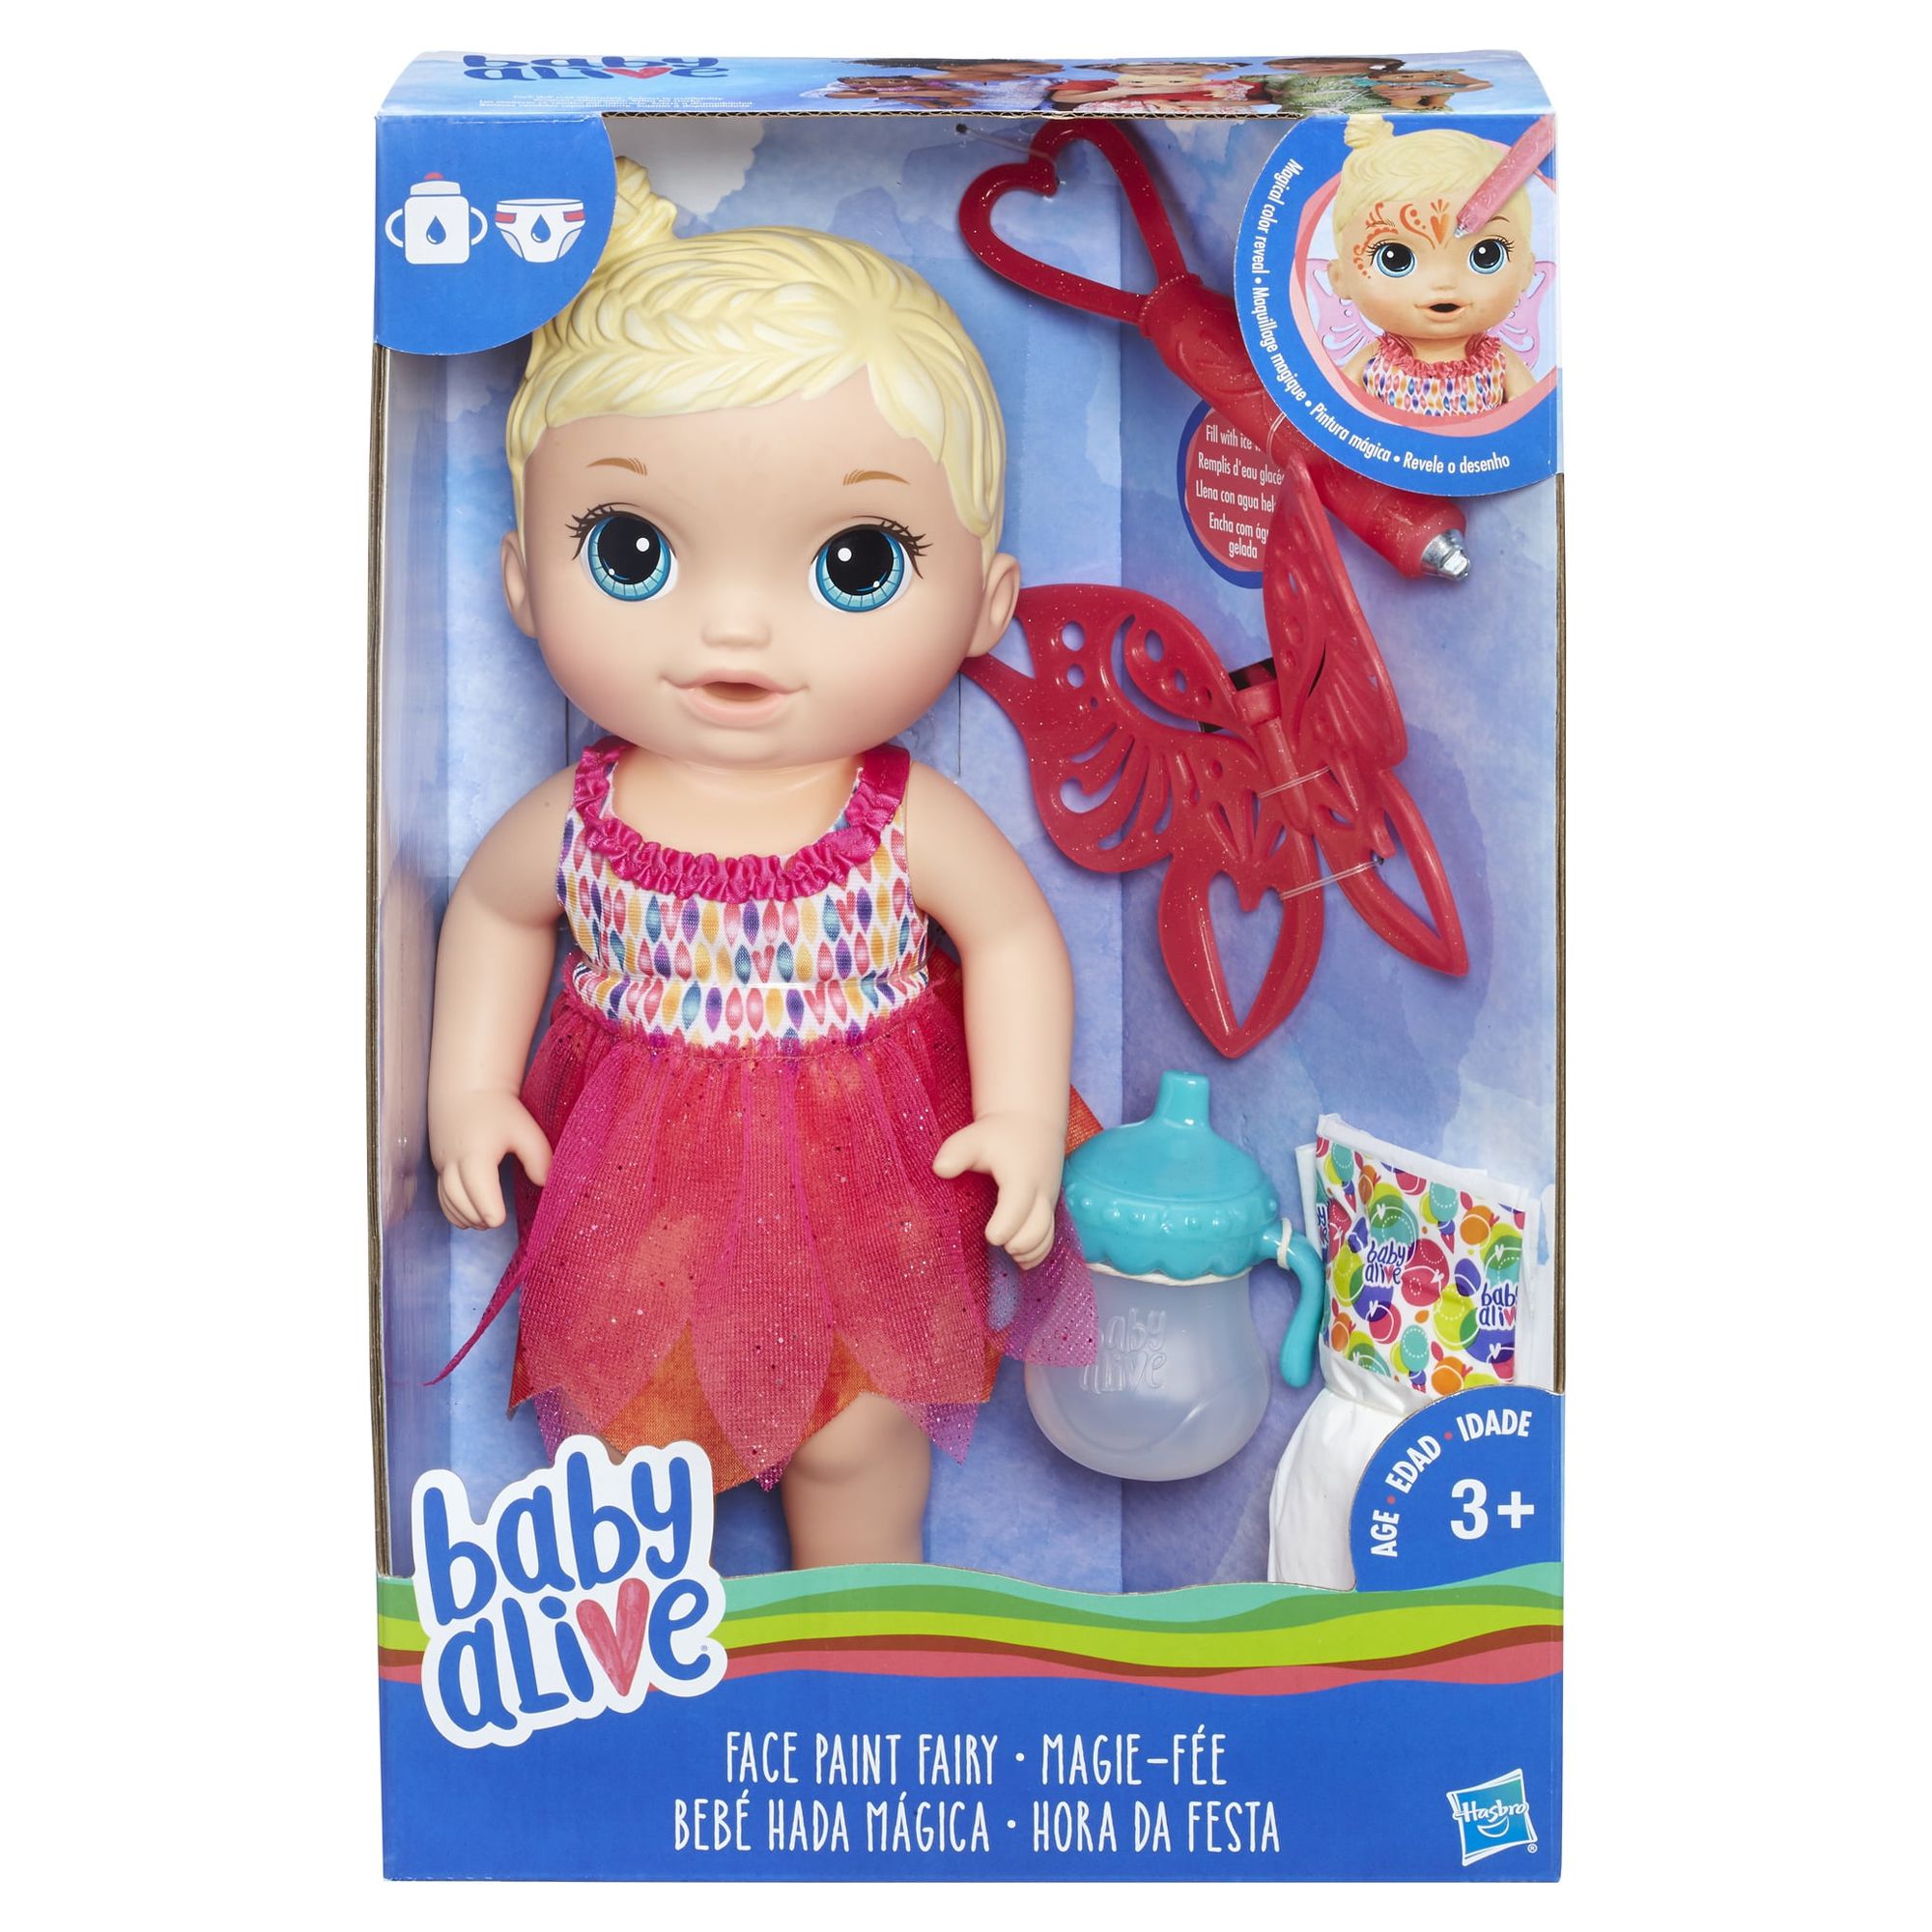 Baby Alive: Face Paint Fairy Blonde Hair Doll Playset - image 3 of 10